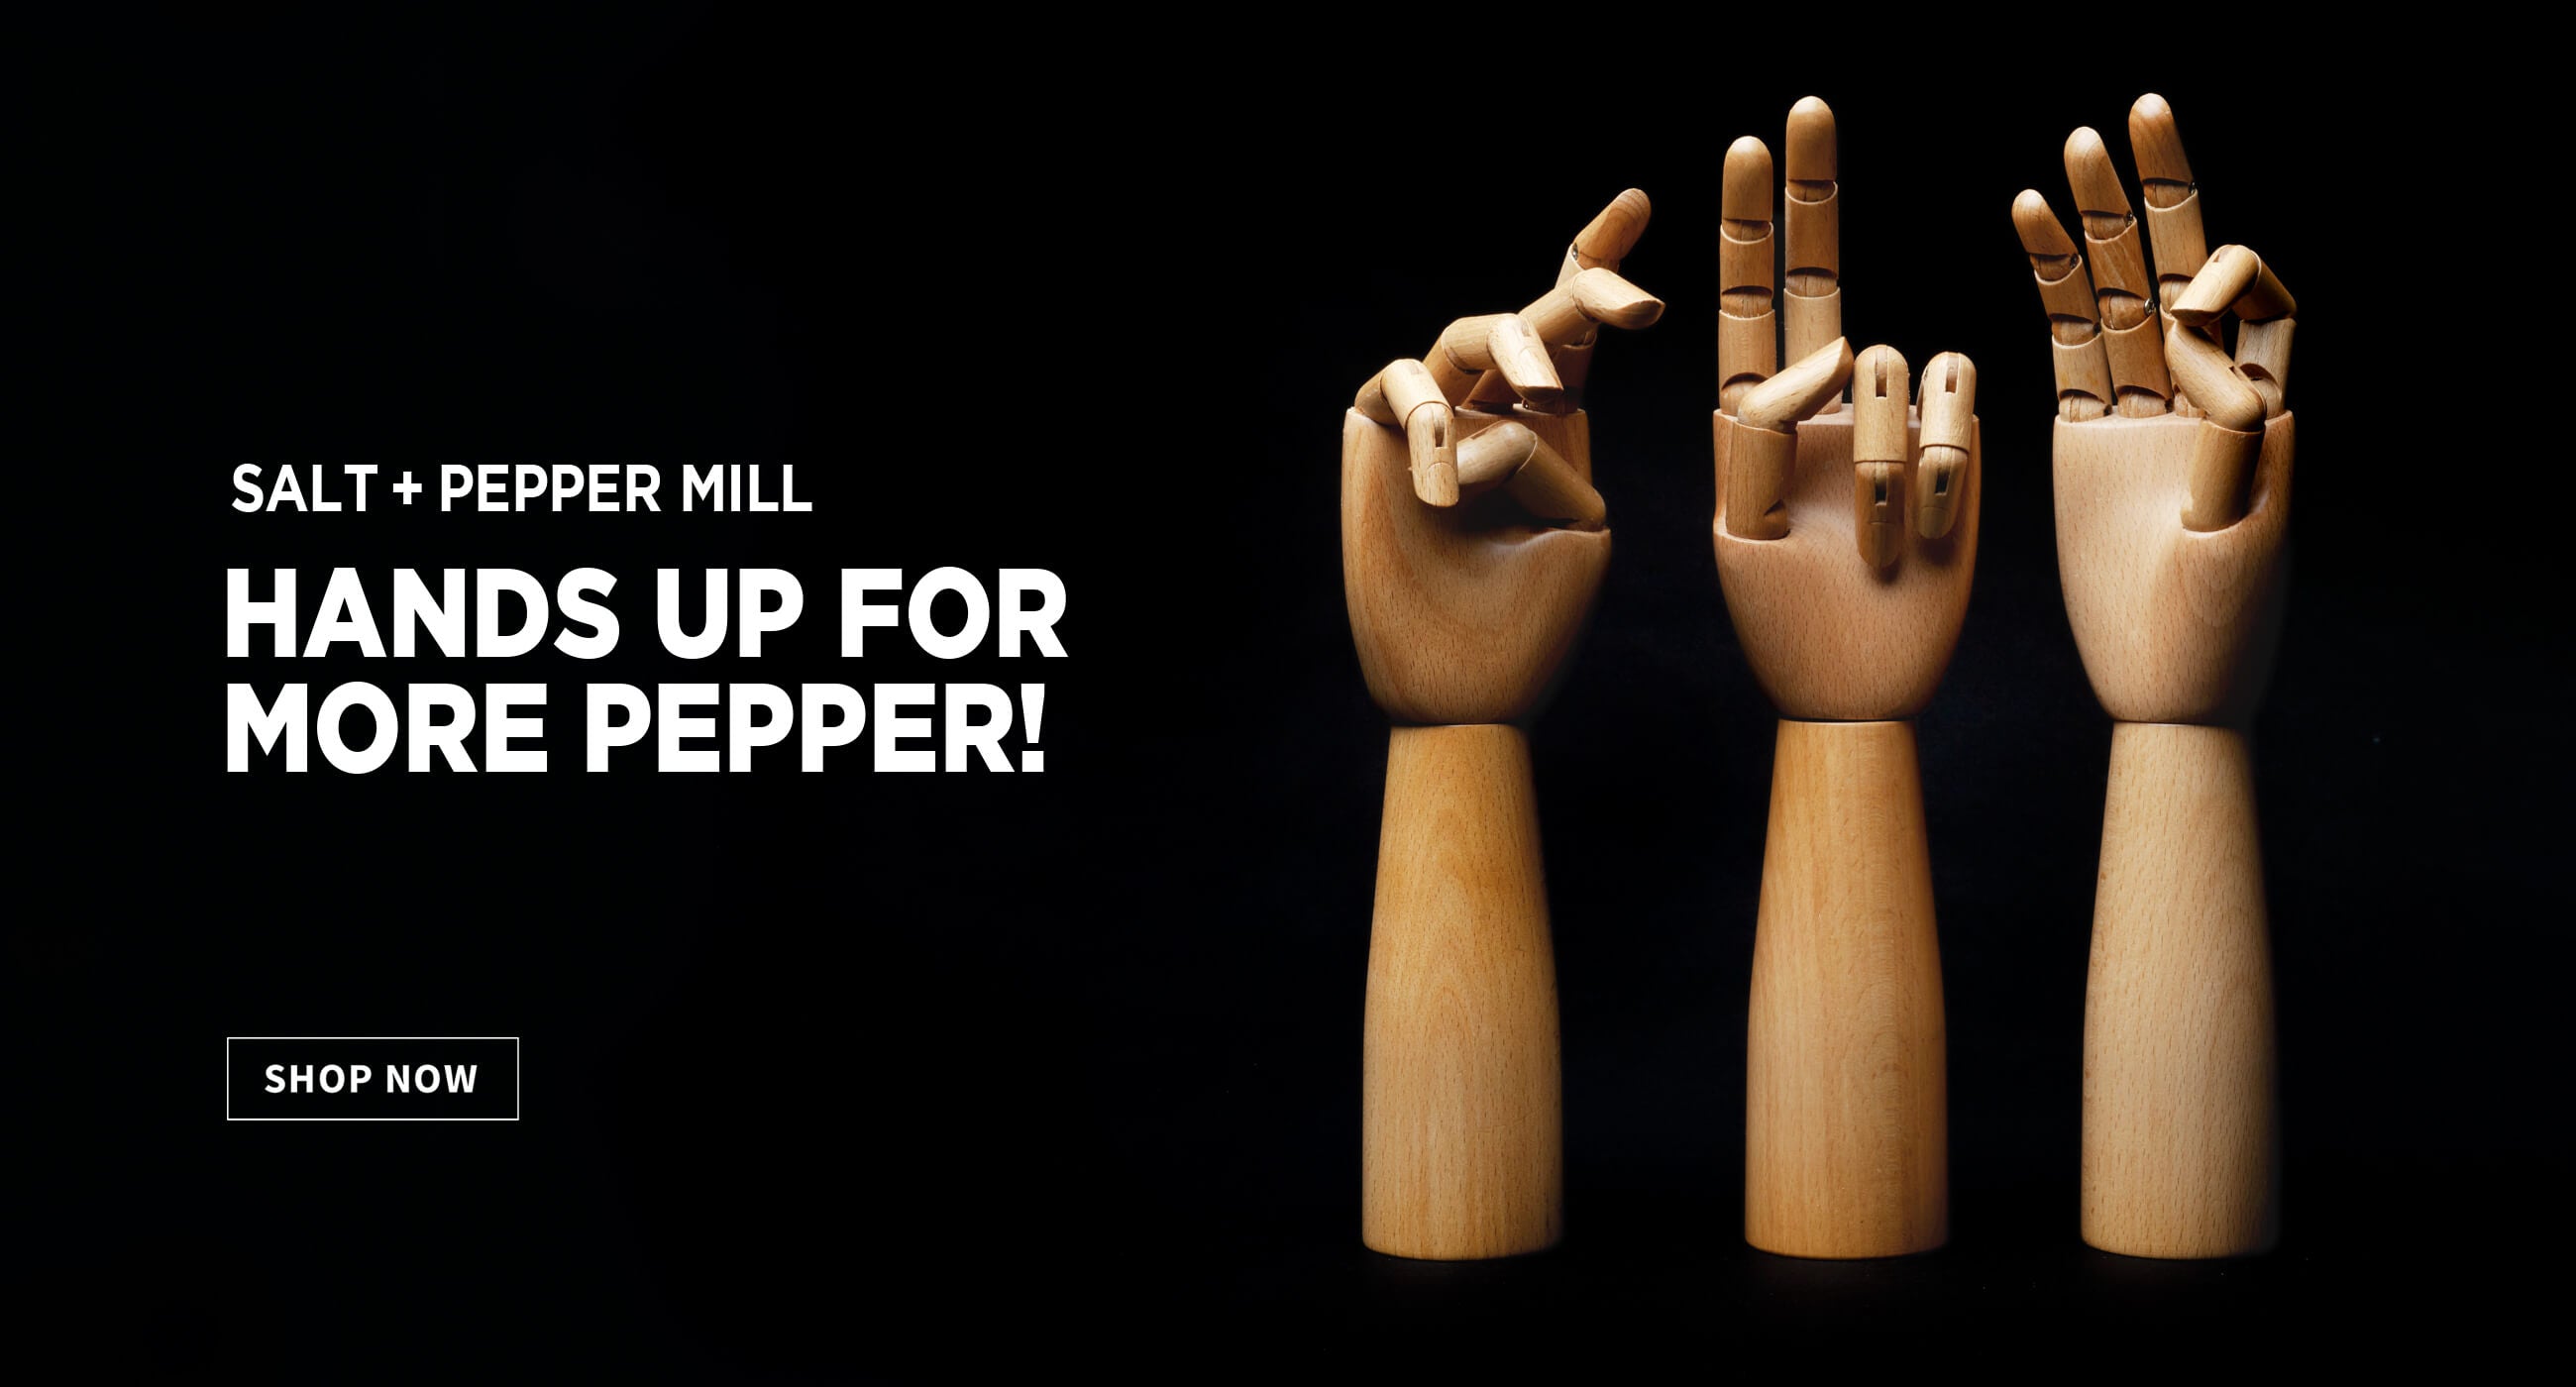 Kilo left and right handed salt and pepper mills